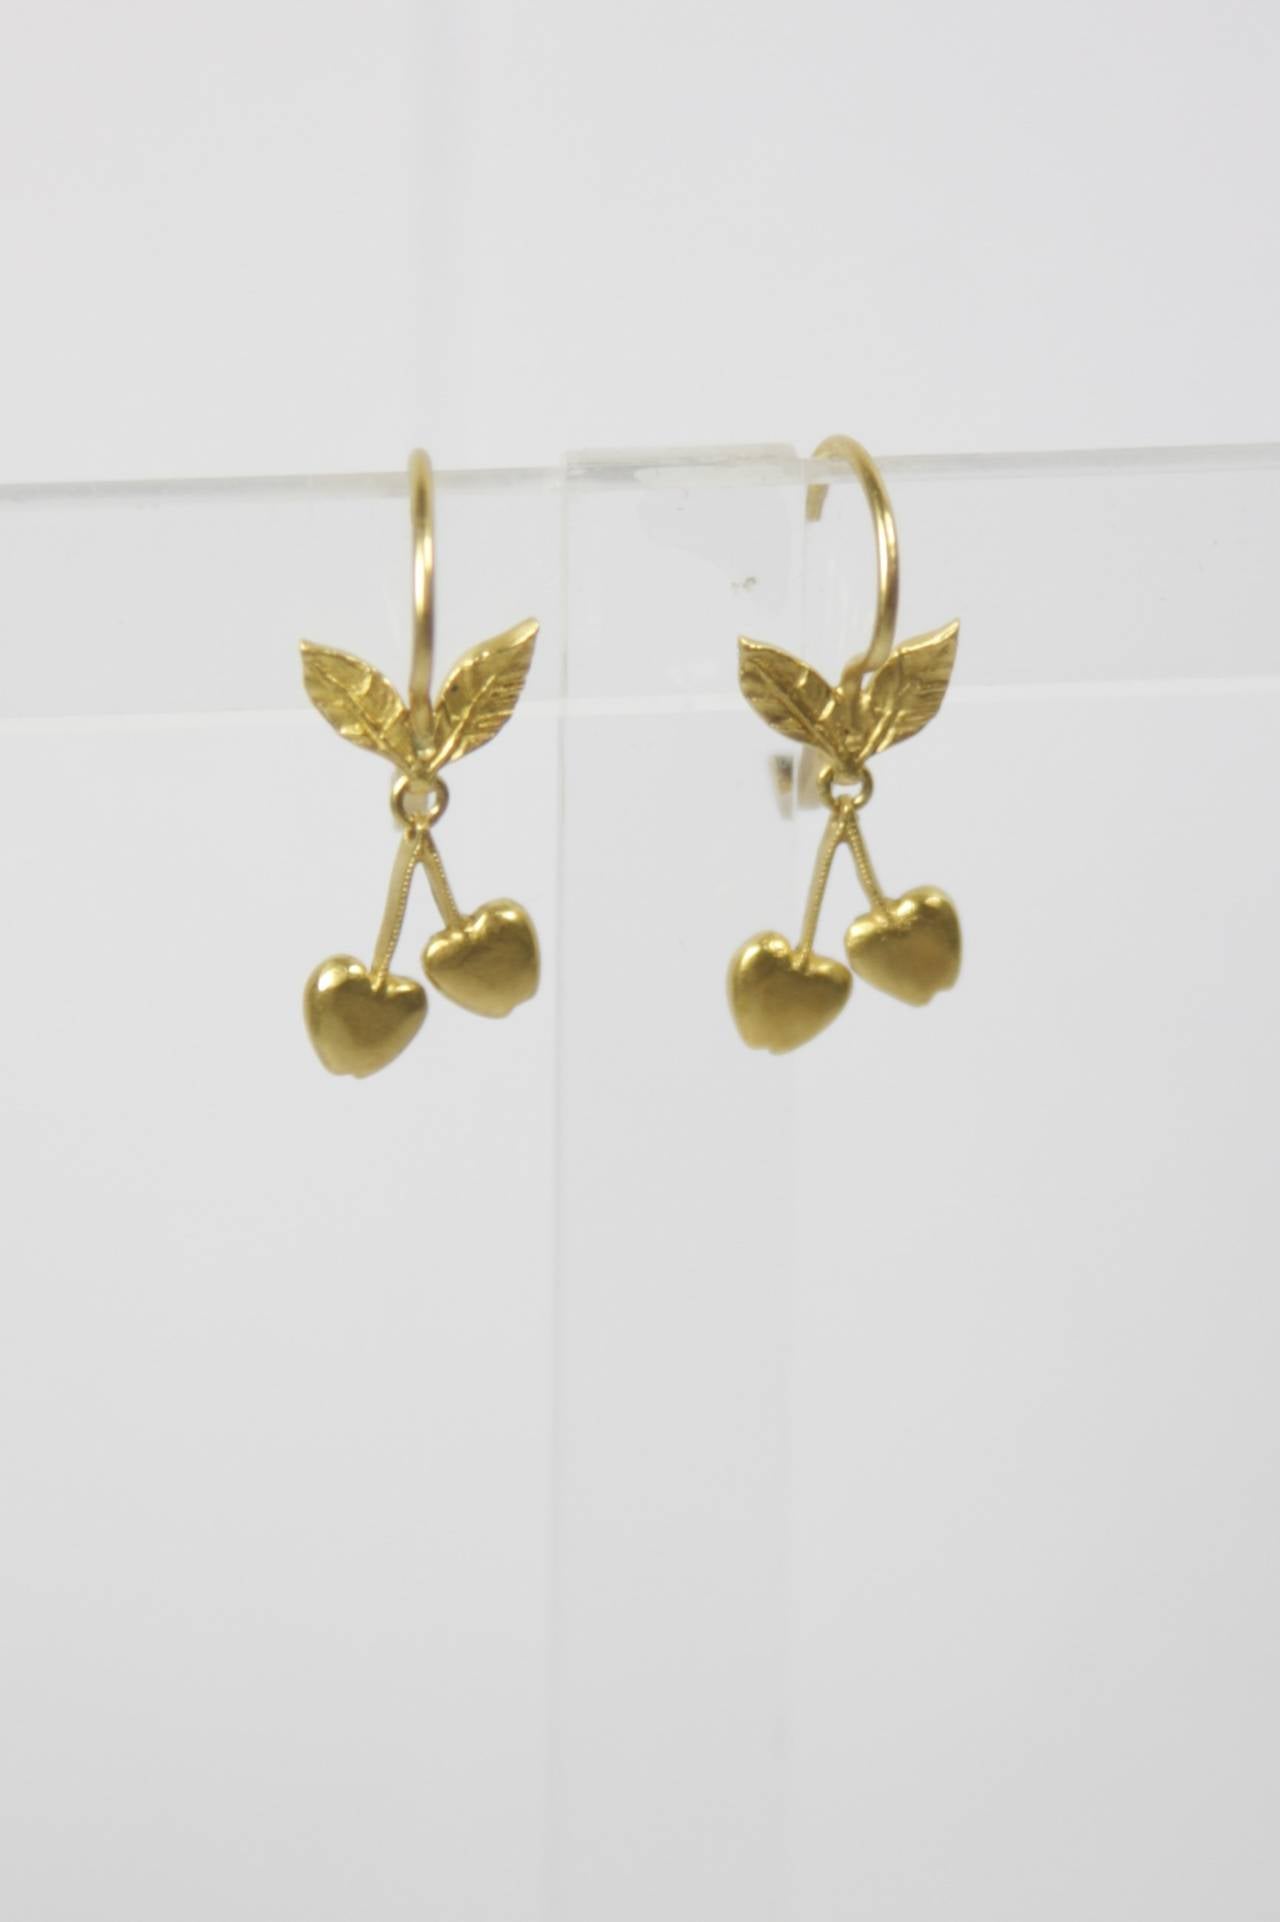 These Cathy Waterman earrings are available through The Paper Bag Princess of Beverly Hills. Please feel free to contact us with any inquiries you may have. 

They are composed of 22KT Gold and feature a lovely cherry theme. Absolutely delicious